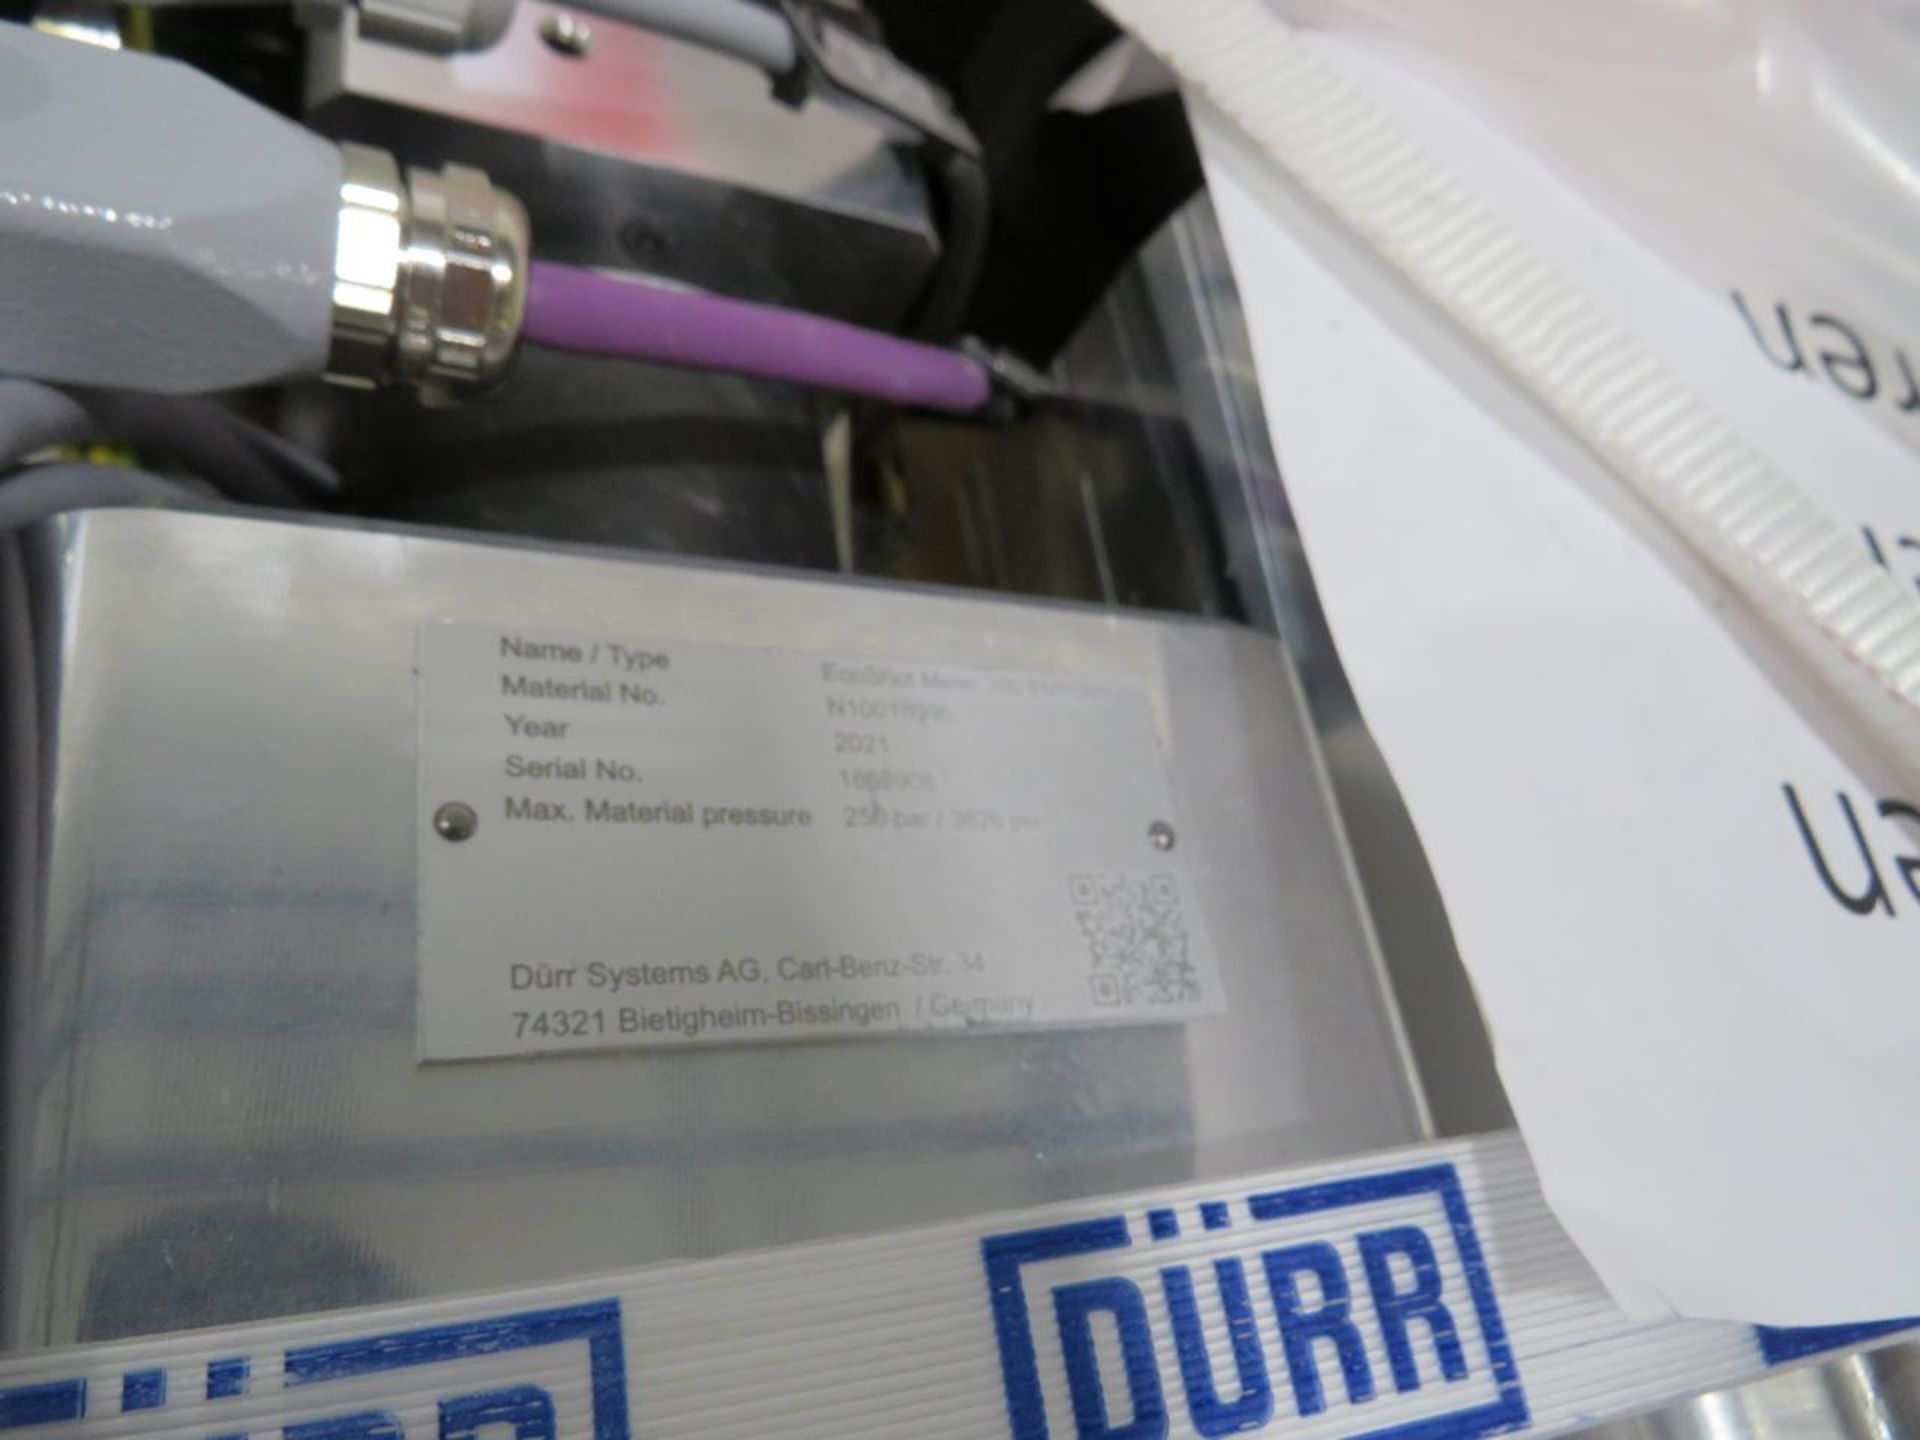 2021 Durr Adhesive Application System 3M-9844 - Image 11 of 17